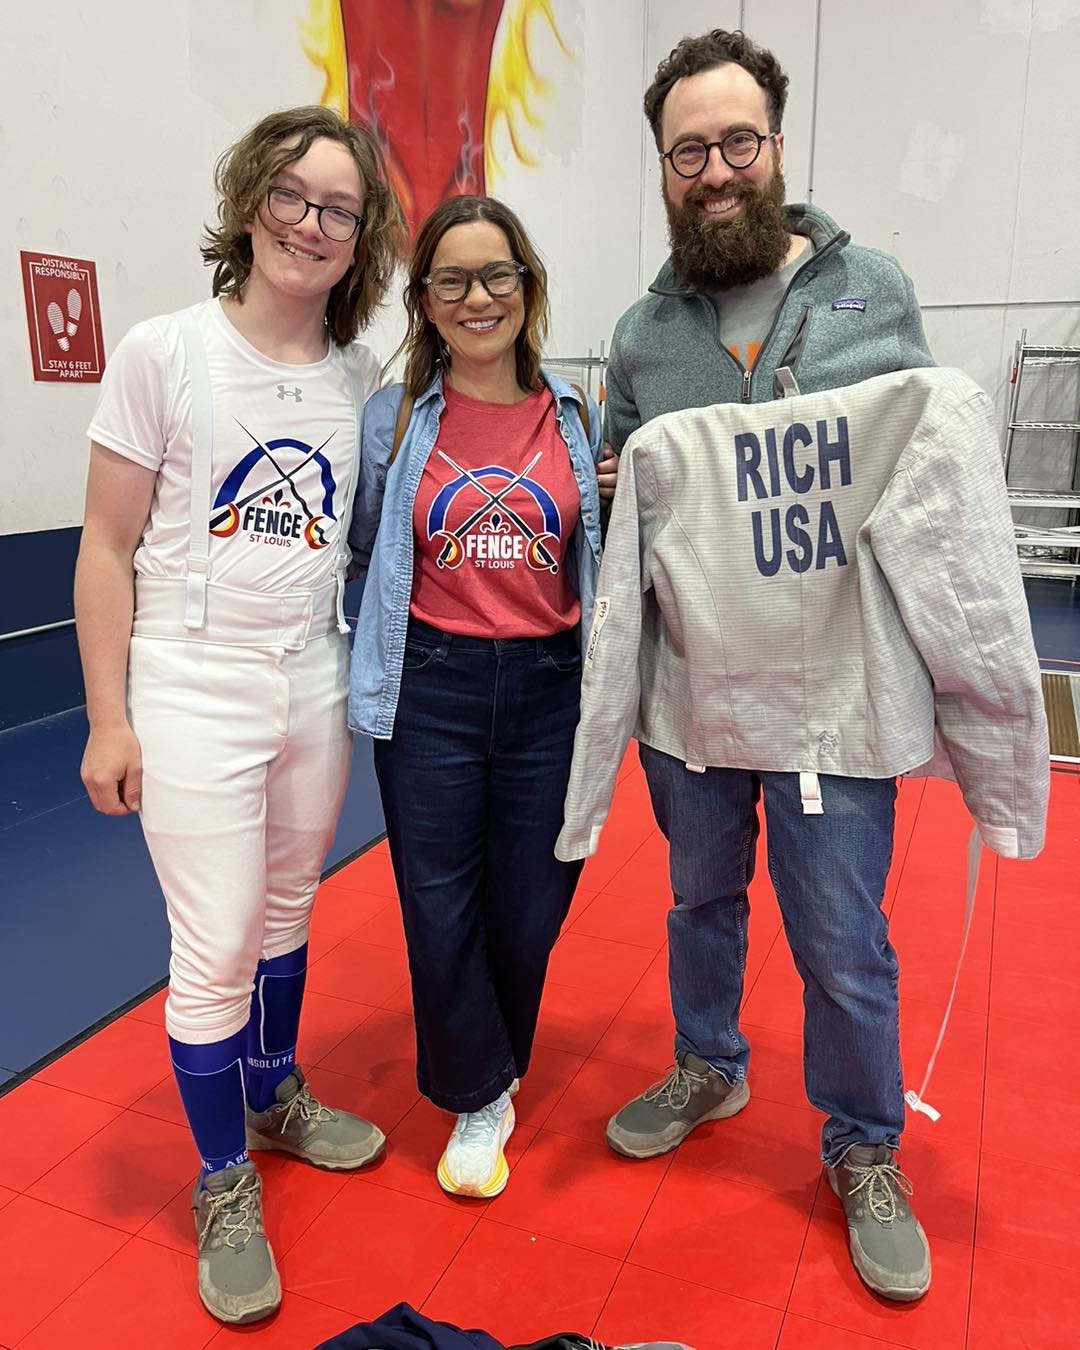 Another weekend, another regional tournament. 💪 

Look at the Fence St. Louis pride from Jamieson and his family! 

#fencestlouis #sabrefencing #saber #stlouis #fencestl #fencingforall #stl #stlouismo #sabre #saberfencing #fencing #stlmade #stlfence